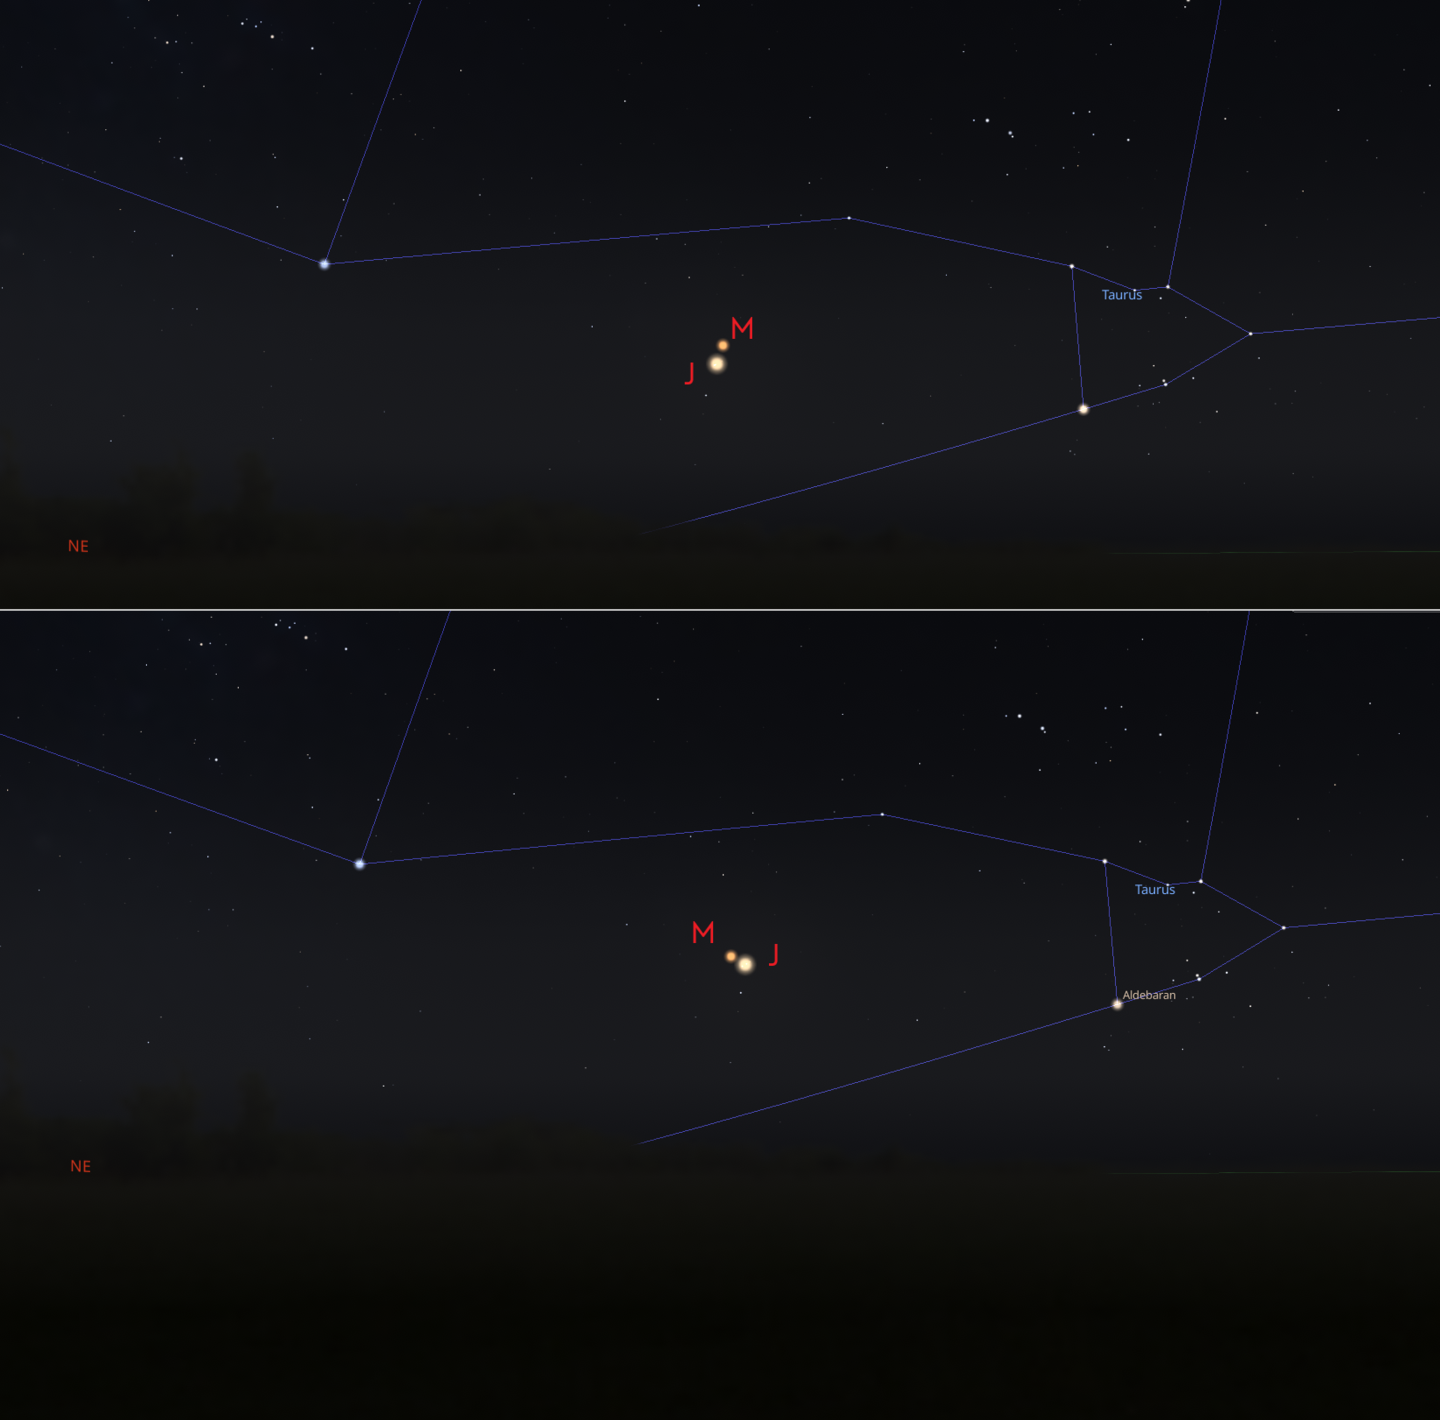 2 Stellarium screenshots in a collage showing Mars and Jupiter positions